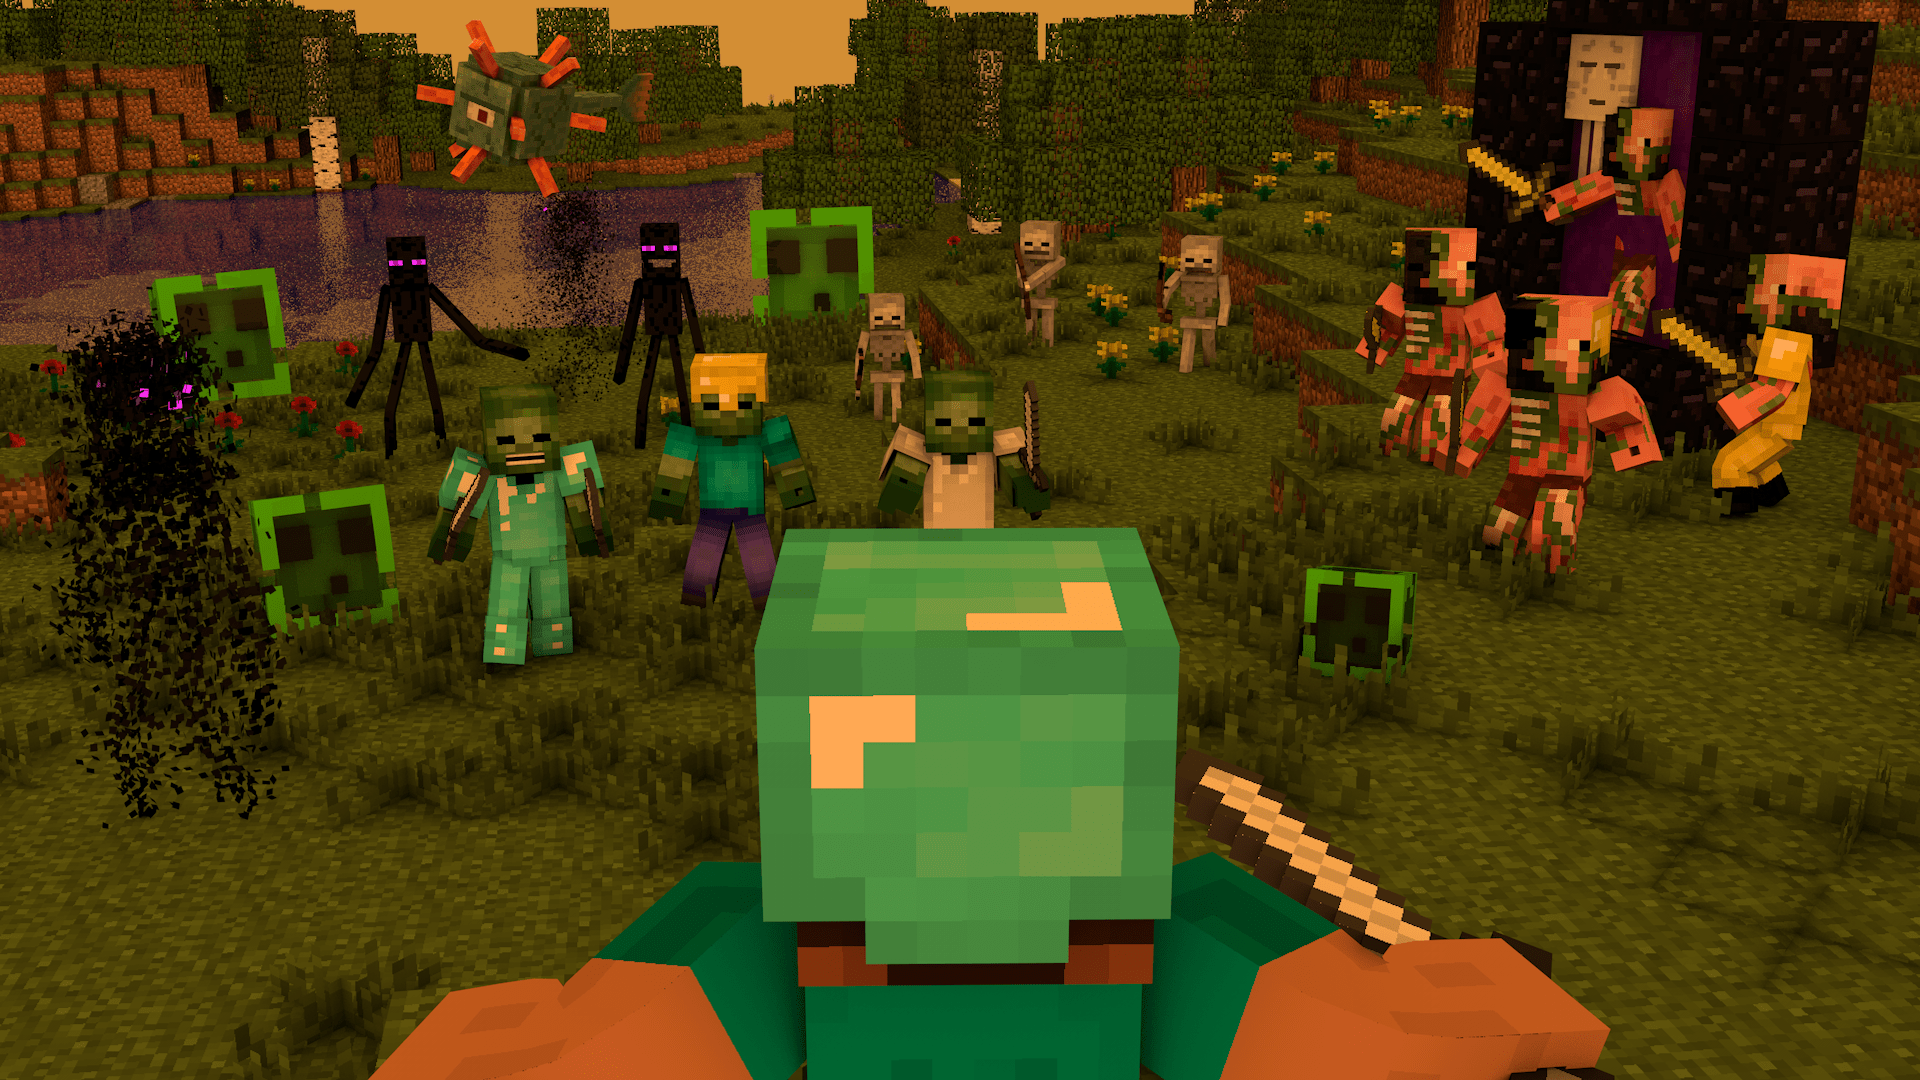 A Minecraft character stands in front of a group of zombies. - Minecraft, gaming